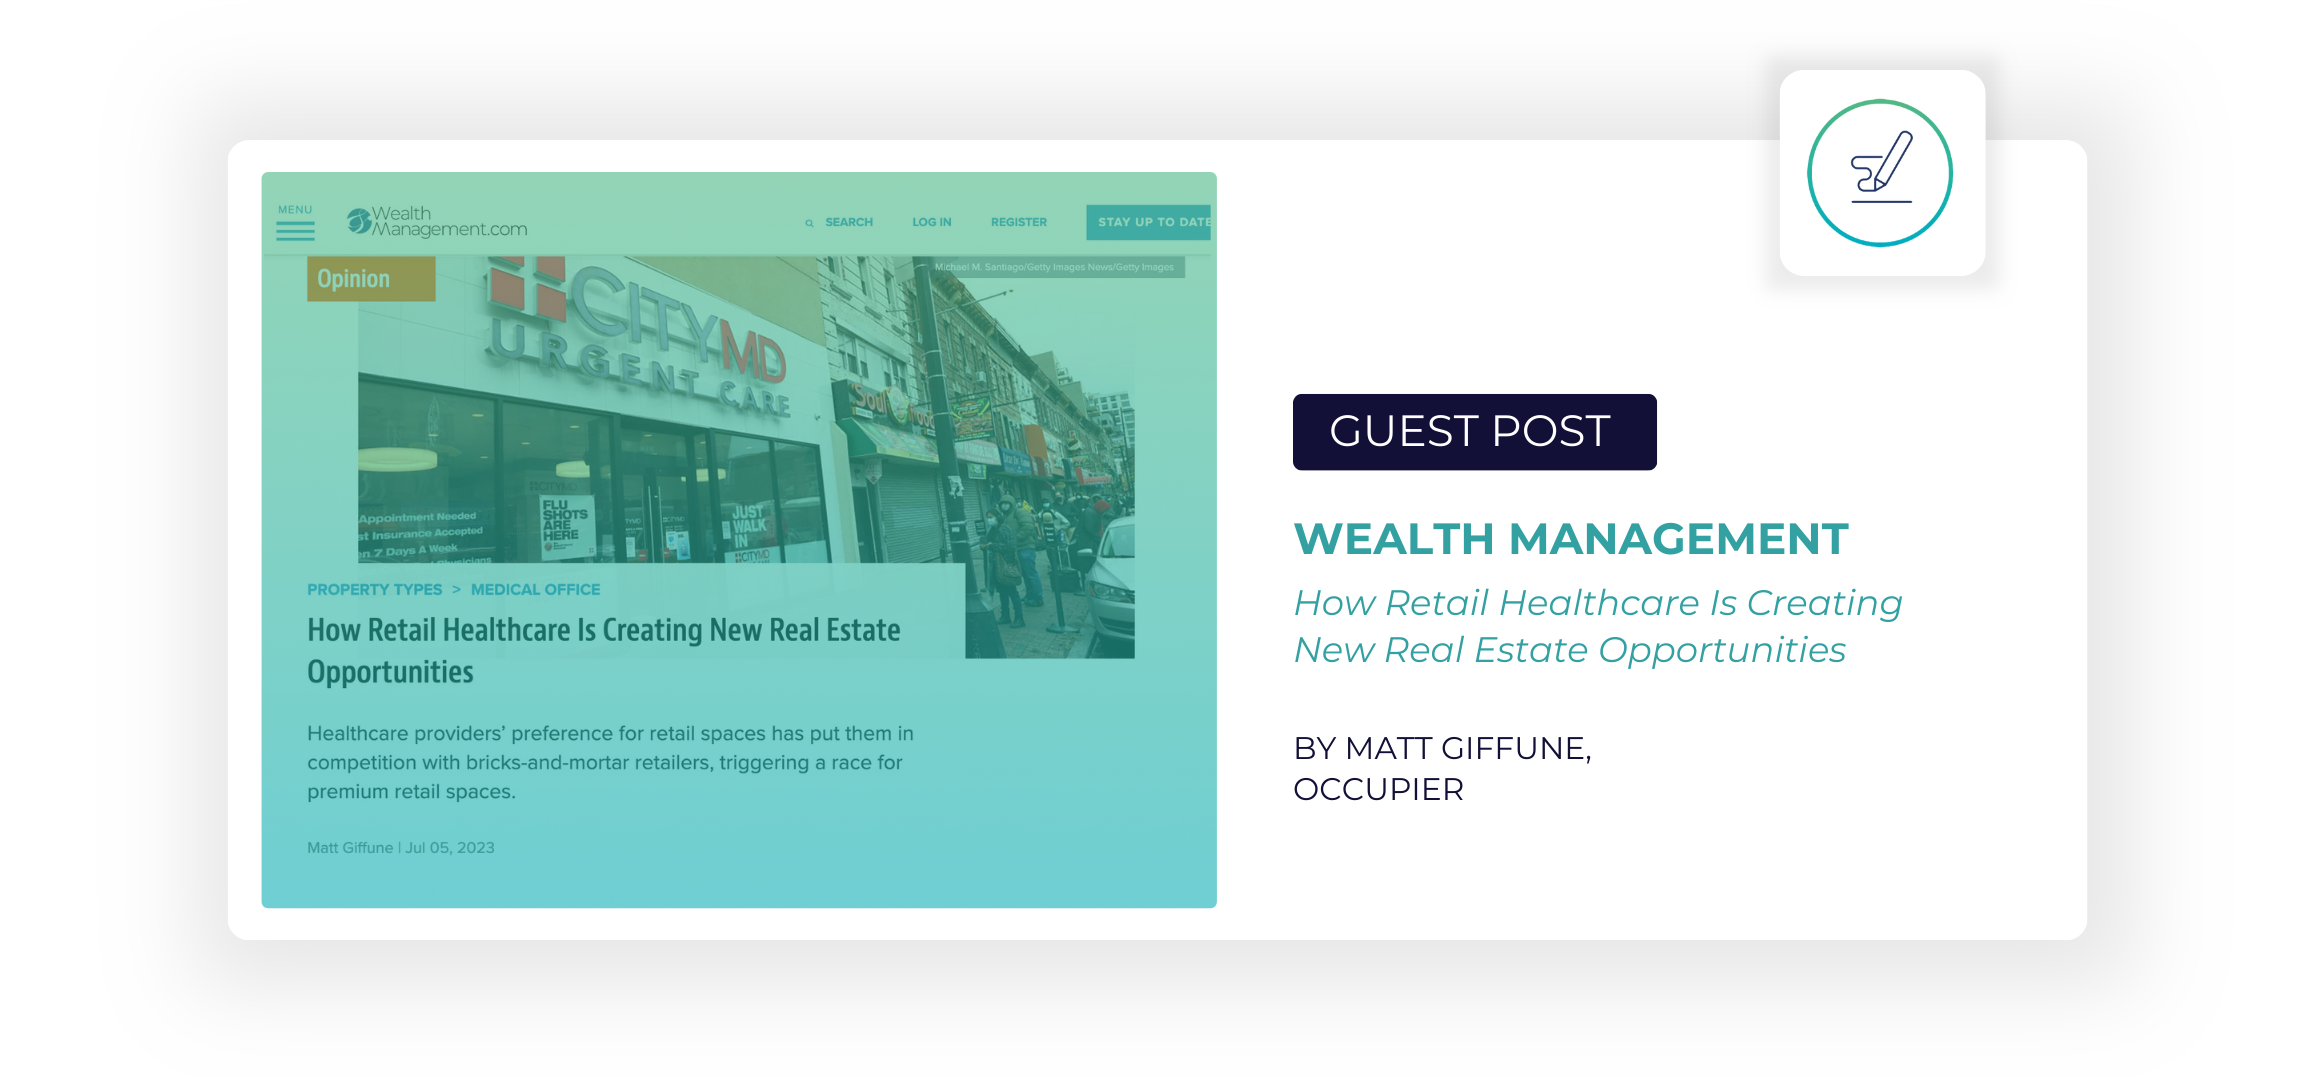 Guest post in Wealth Management by Matt Giffune of Occupier: How Retail Healthcare Is Creating New Real Estate Opportunities